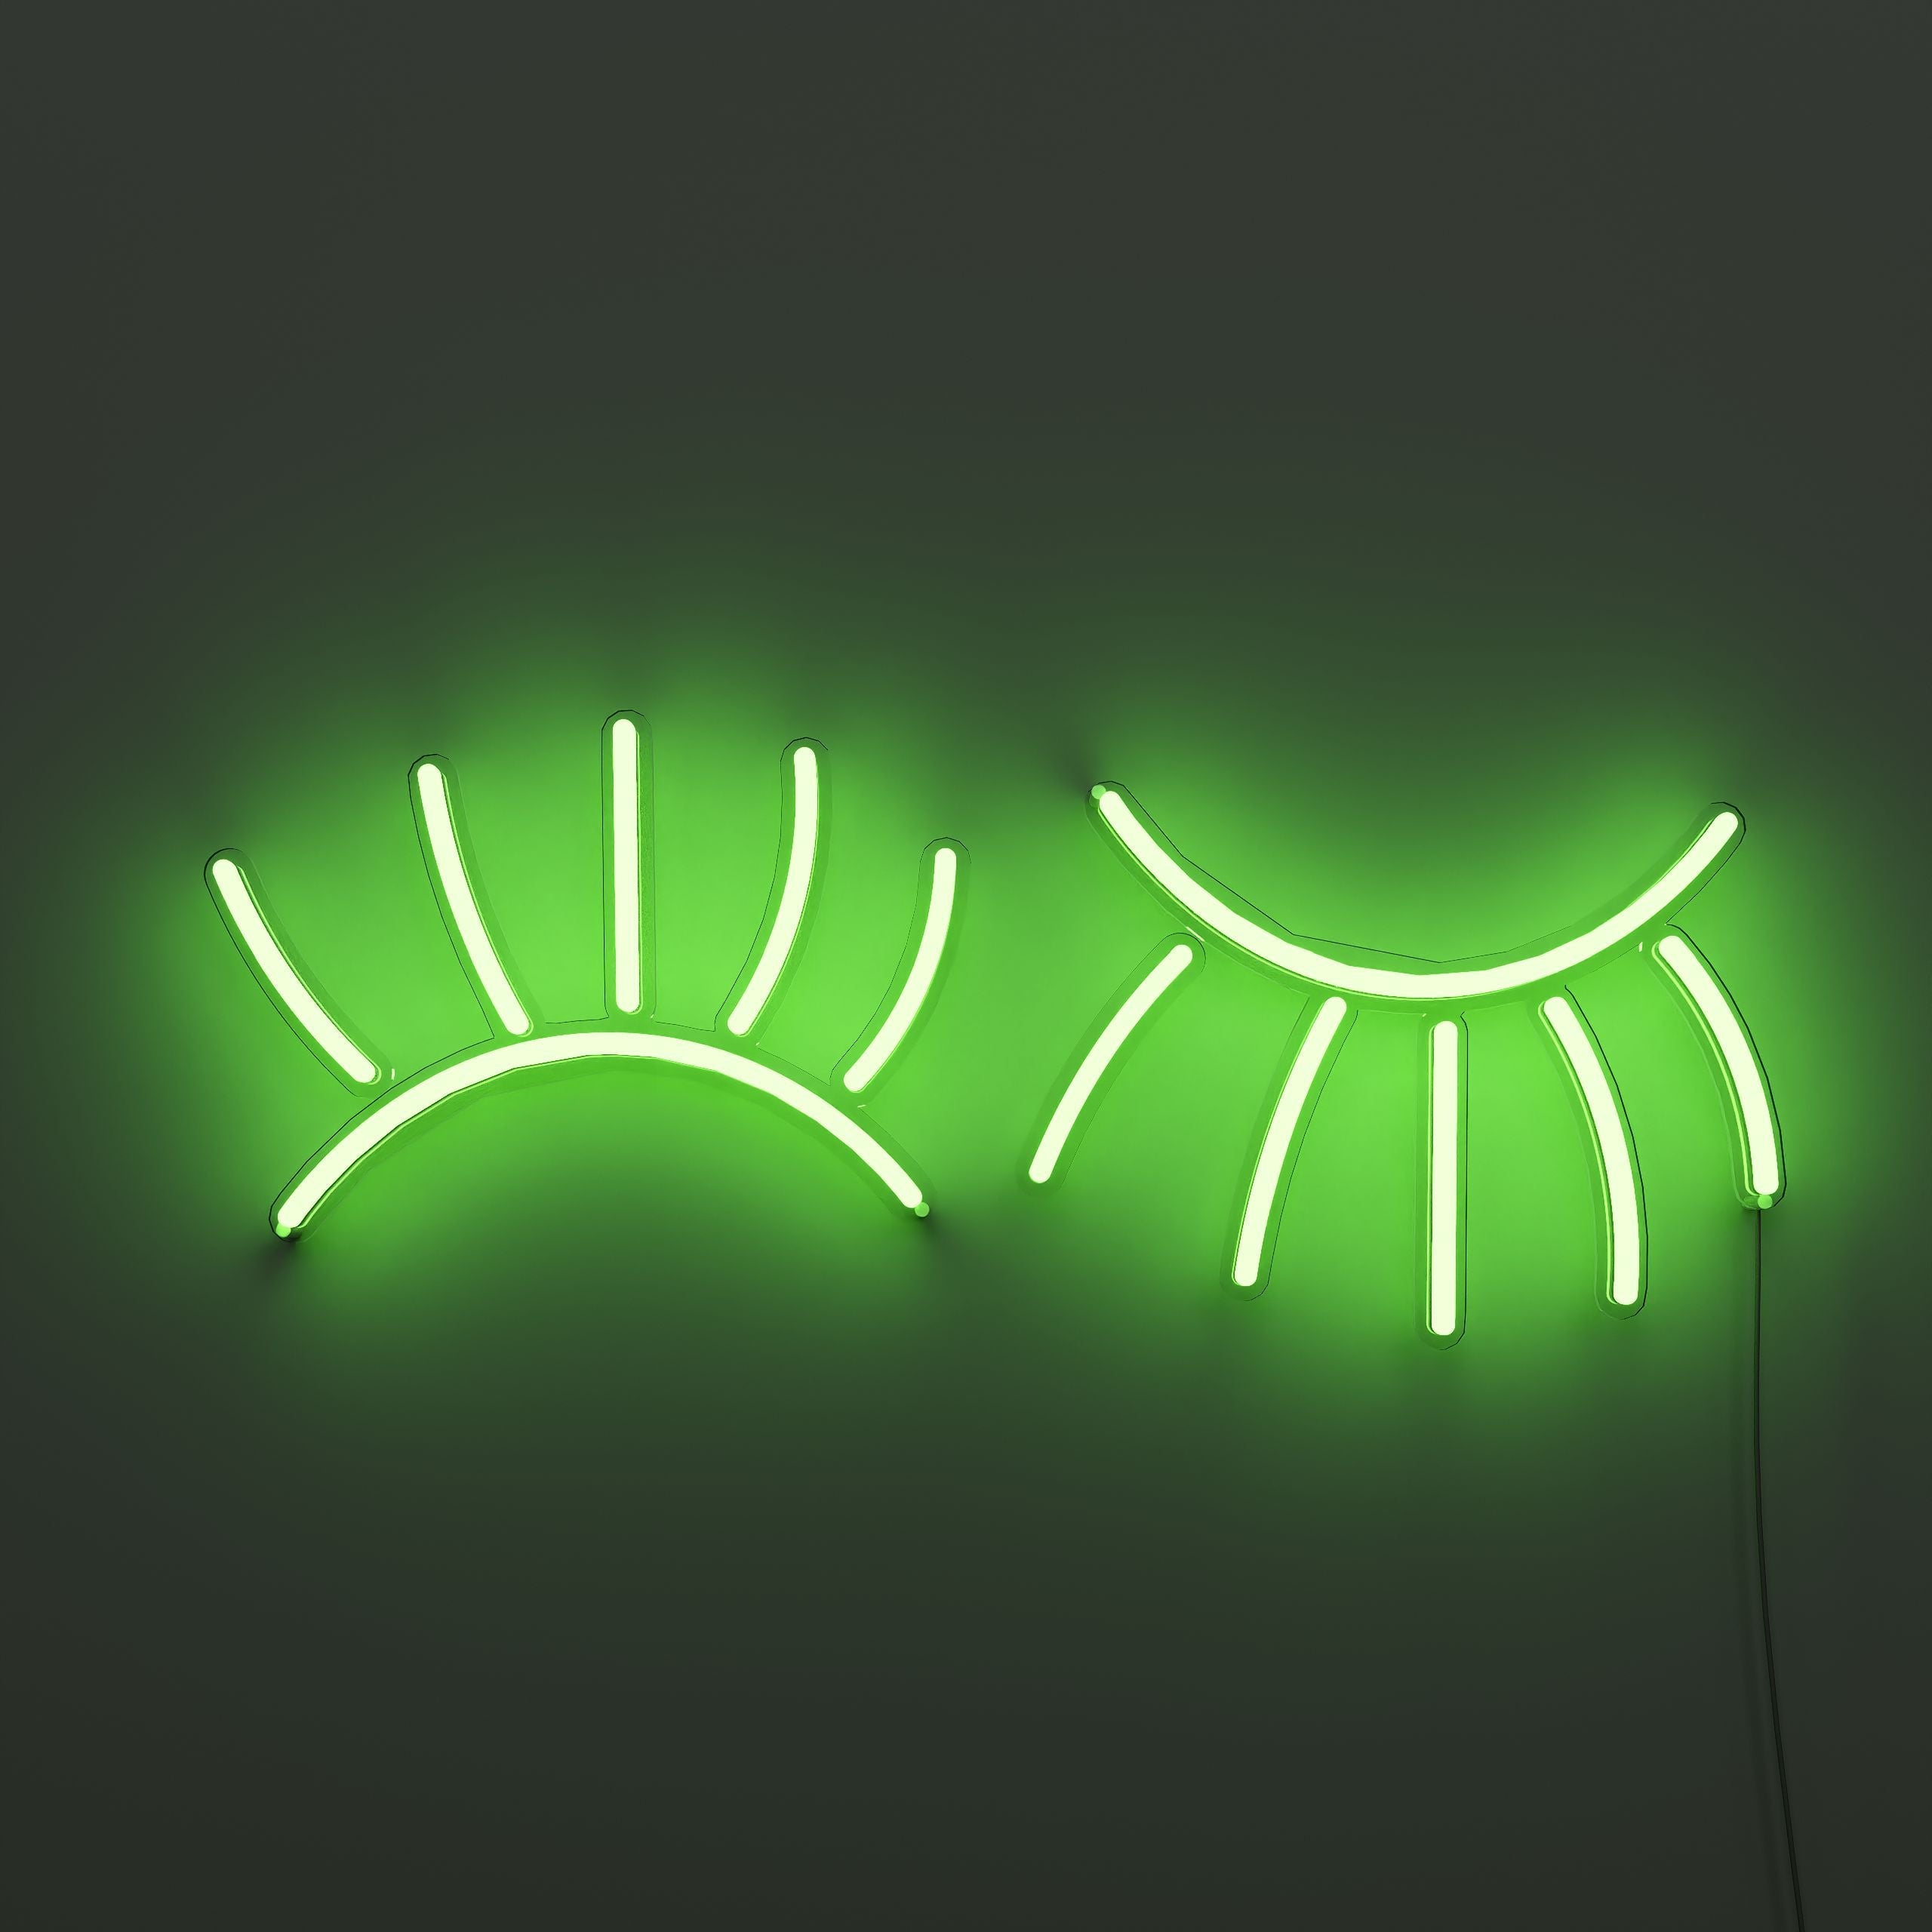 bold-wink-lashes-neon-sign-lite